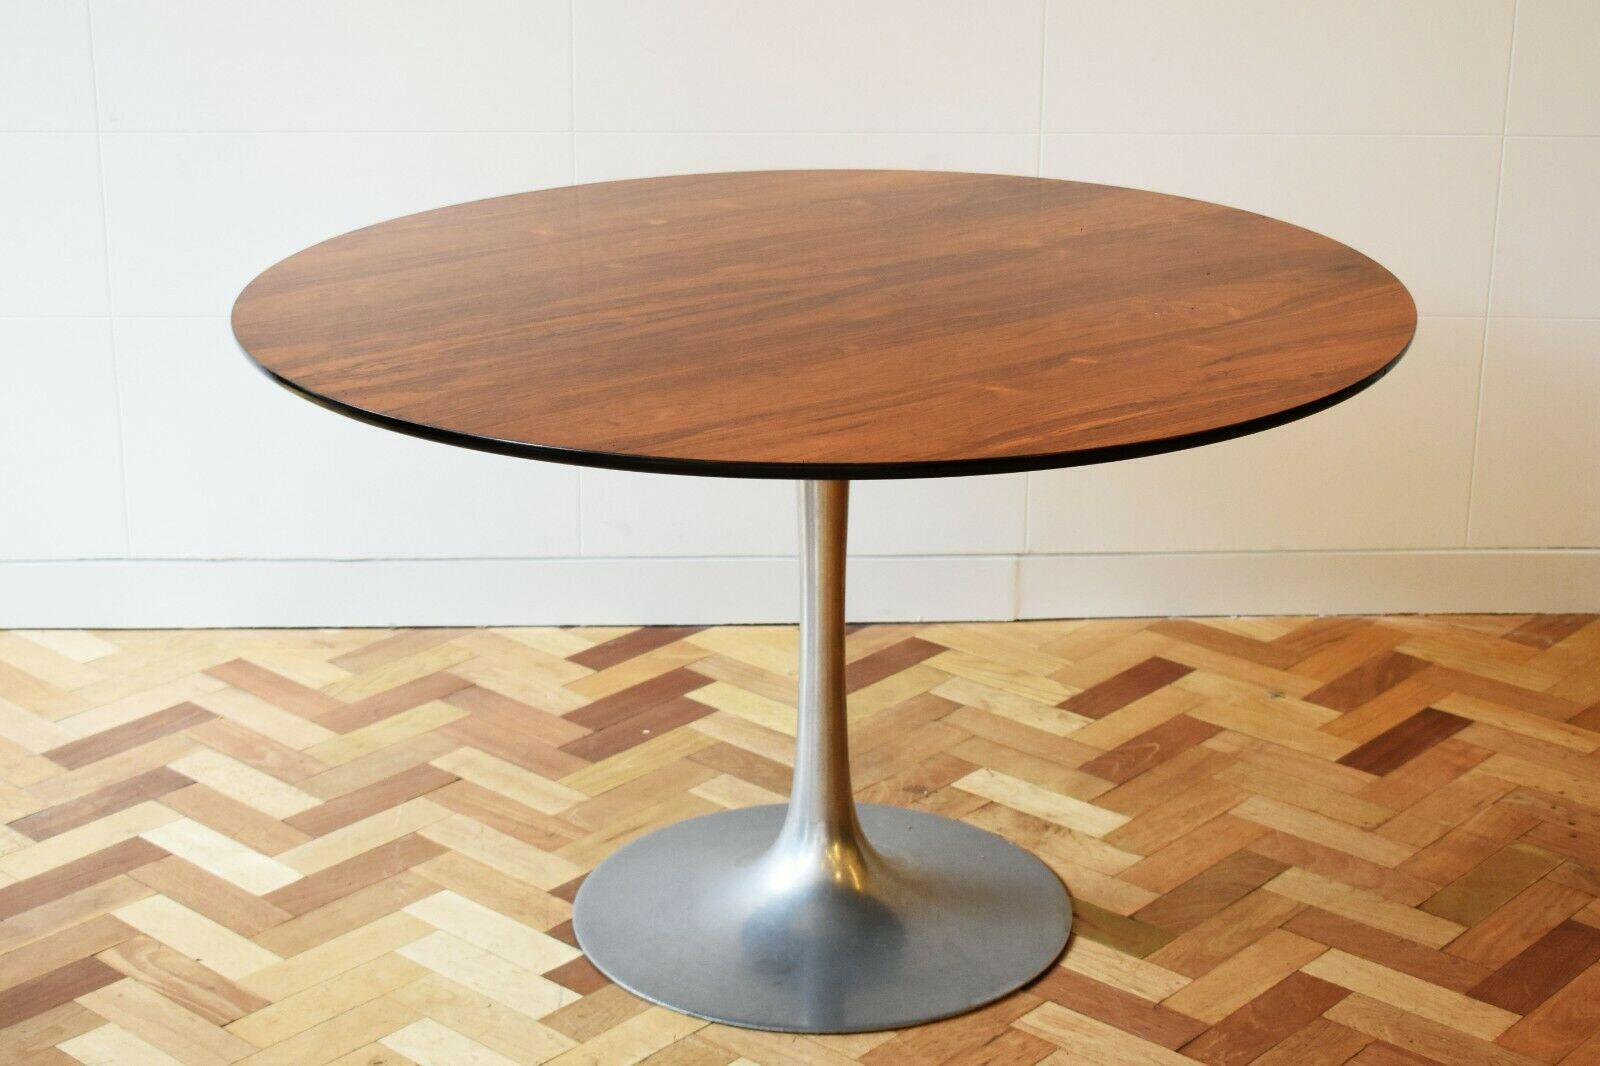 Mid 20th century rosewood tulip dining table, designed by Maurice Burke for Arkana in the 1960s. 

Set up on a sleek aluminium base, this elegant table comfortably seats six. Simple yet versatile, this would look perfect in any modernist space.